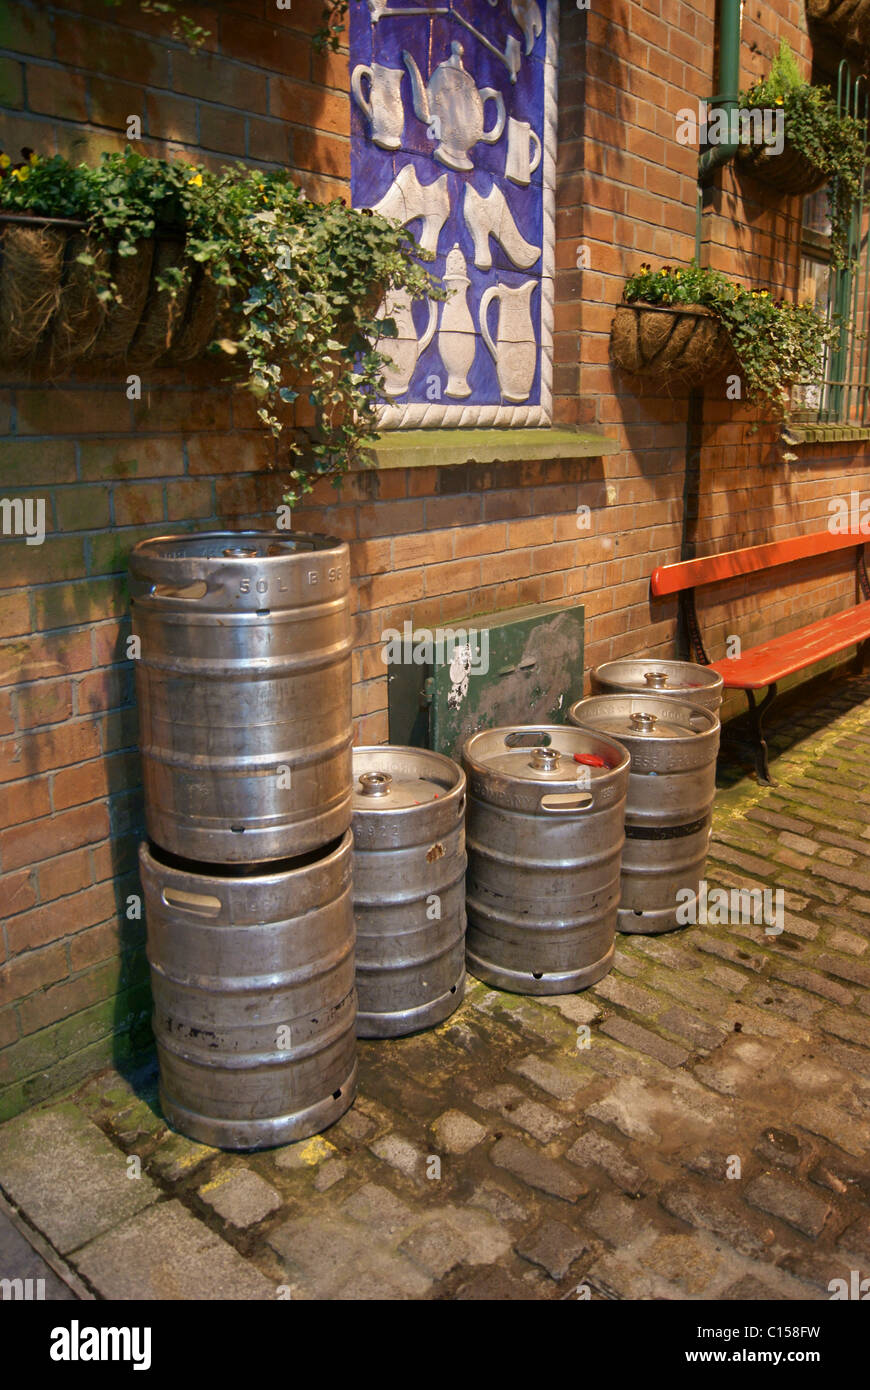 Beer Kegs Cobbles And Plants Stock Photo